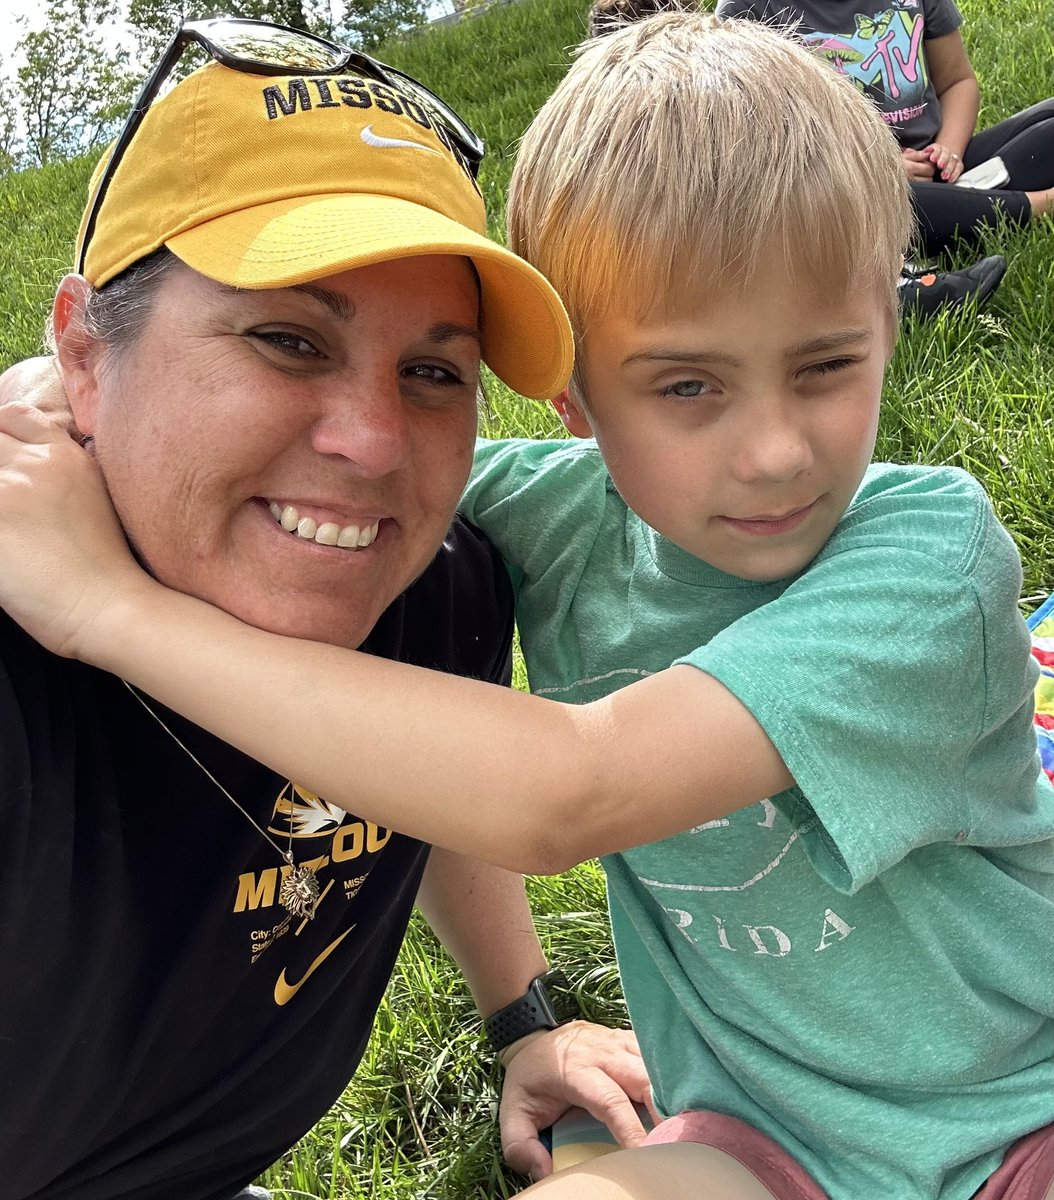 I got to meet up with #mightymax on his field trip this morning. They came to Mizzou, which makes it easy. #MIZ #MomsWhoCoach